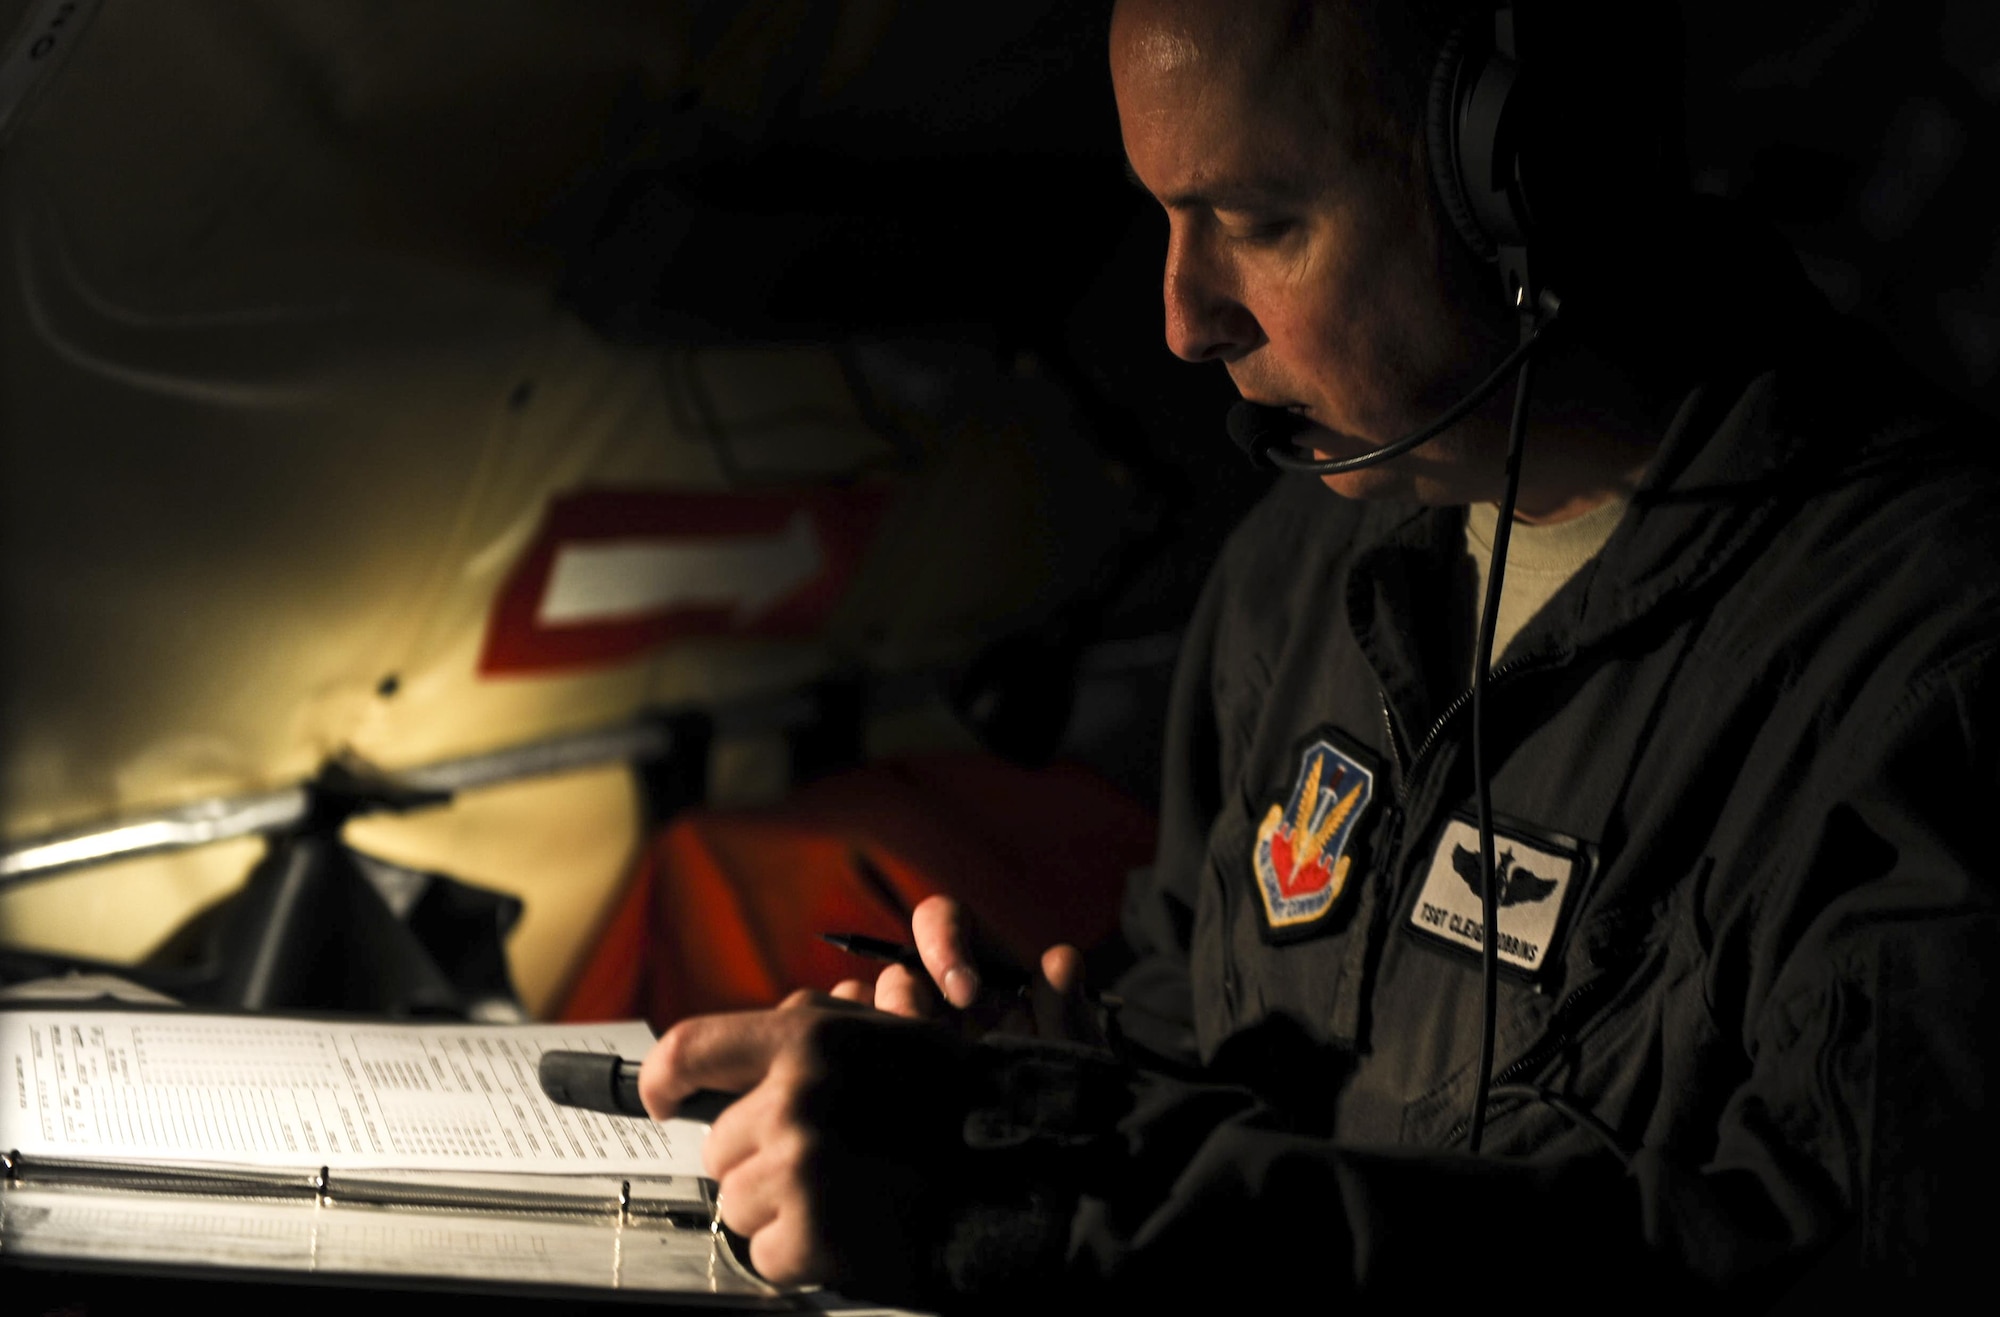 Tech. Sgt. Cleigh Robbins, boom operator assigned to the 509th Weapons Squadron, prepares a KC-135 Stratotanker before participating in defensive counter air on Nellis Air Force Base, Dec. 14, 2016. Students from the USAFWS class 16-B completed their five-and-a-half month course with the last sortie of advanced integration, defensive counter air, taking place over the Nevada Test and Training Range. (U.S. Air Force photo by Airman 1st Class Kevin Tanenbaum/Released)

